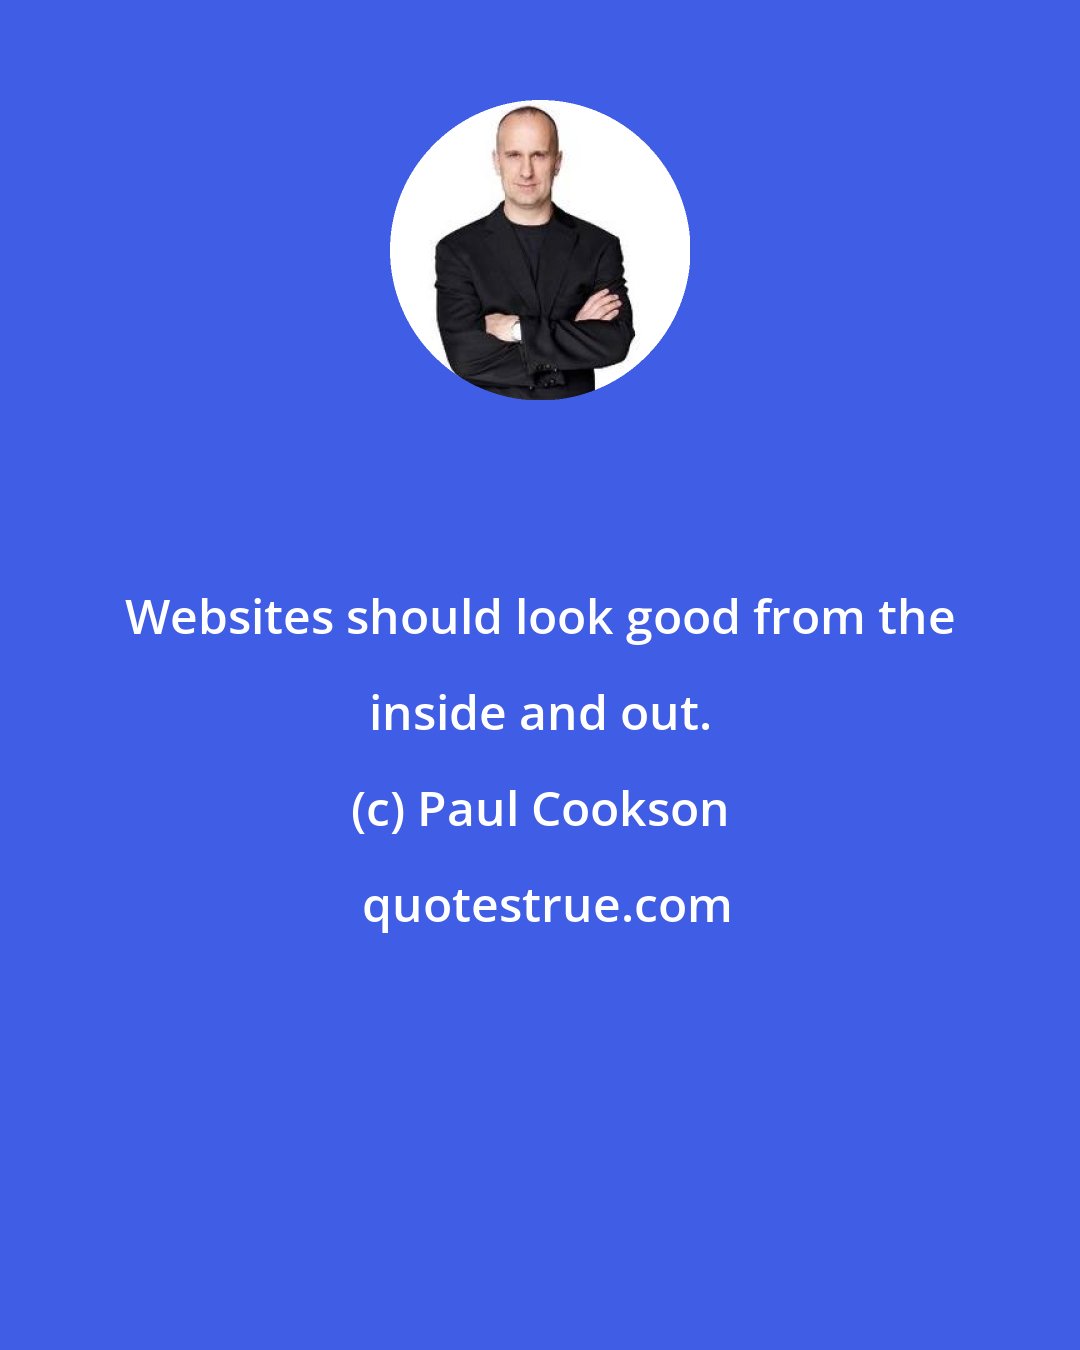 Paul Cookson: Websites should look good from the inside and out.